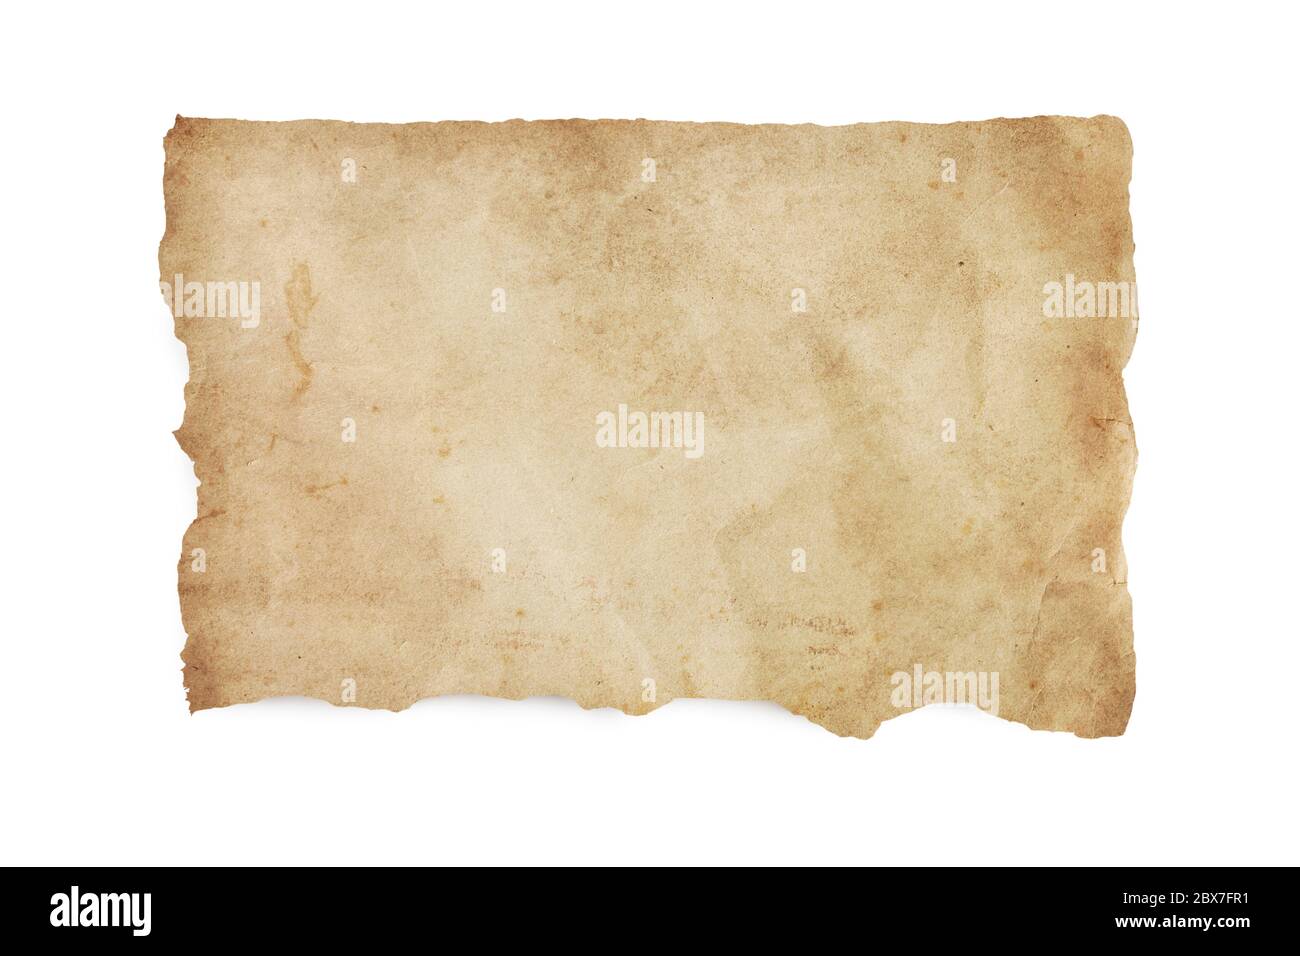 Torn old stained paper with clipping path.  isolated on white with soft shadow. Stock Photo